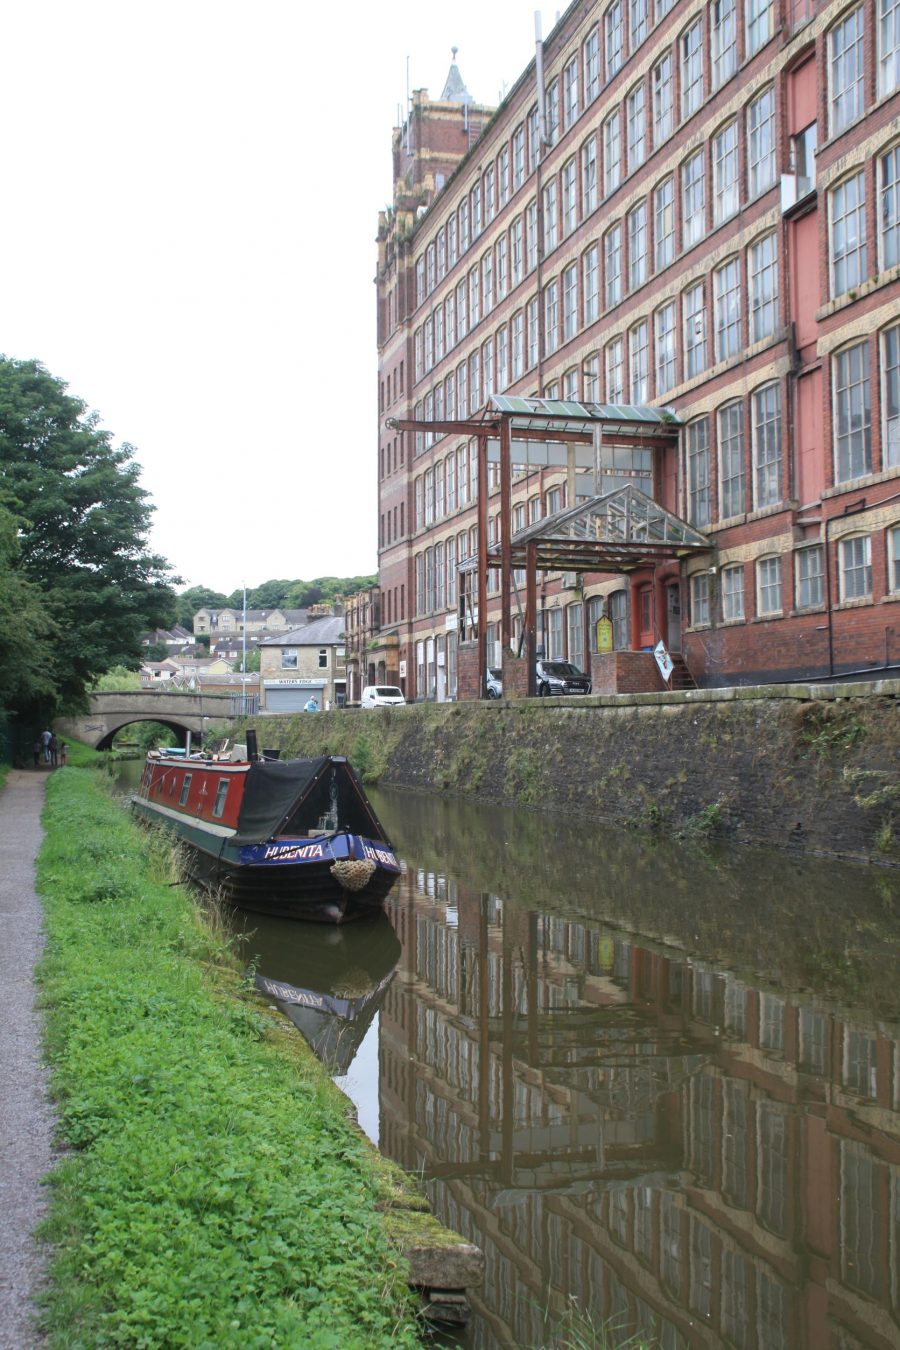 Passing old mill in Marple on Macclesfield Canal